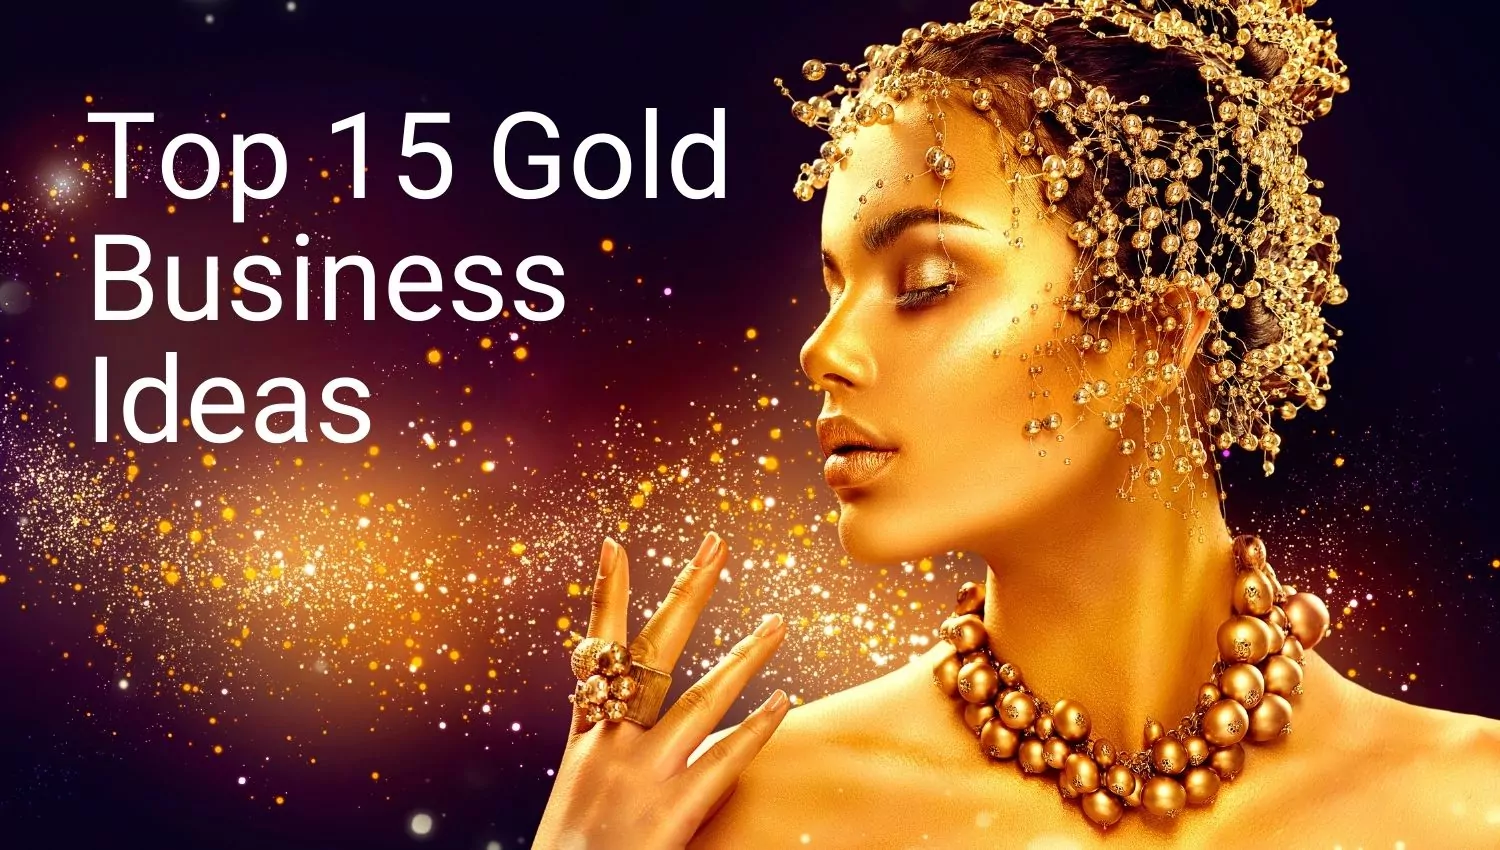 Gold Business Ideas Top 15 Startup Plans For Jewellers